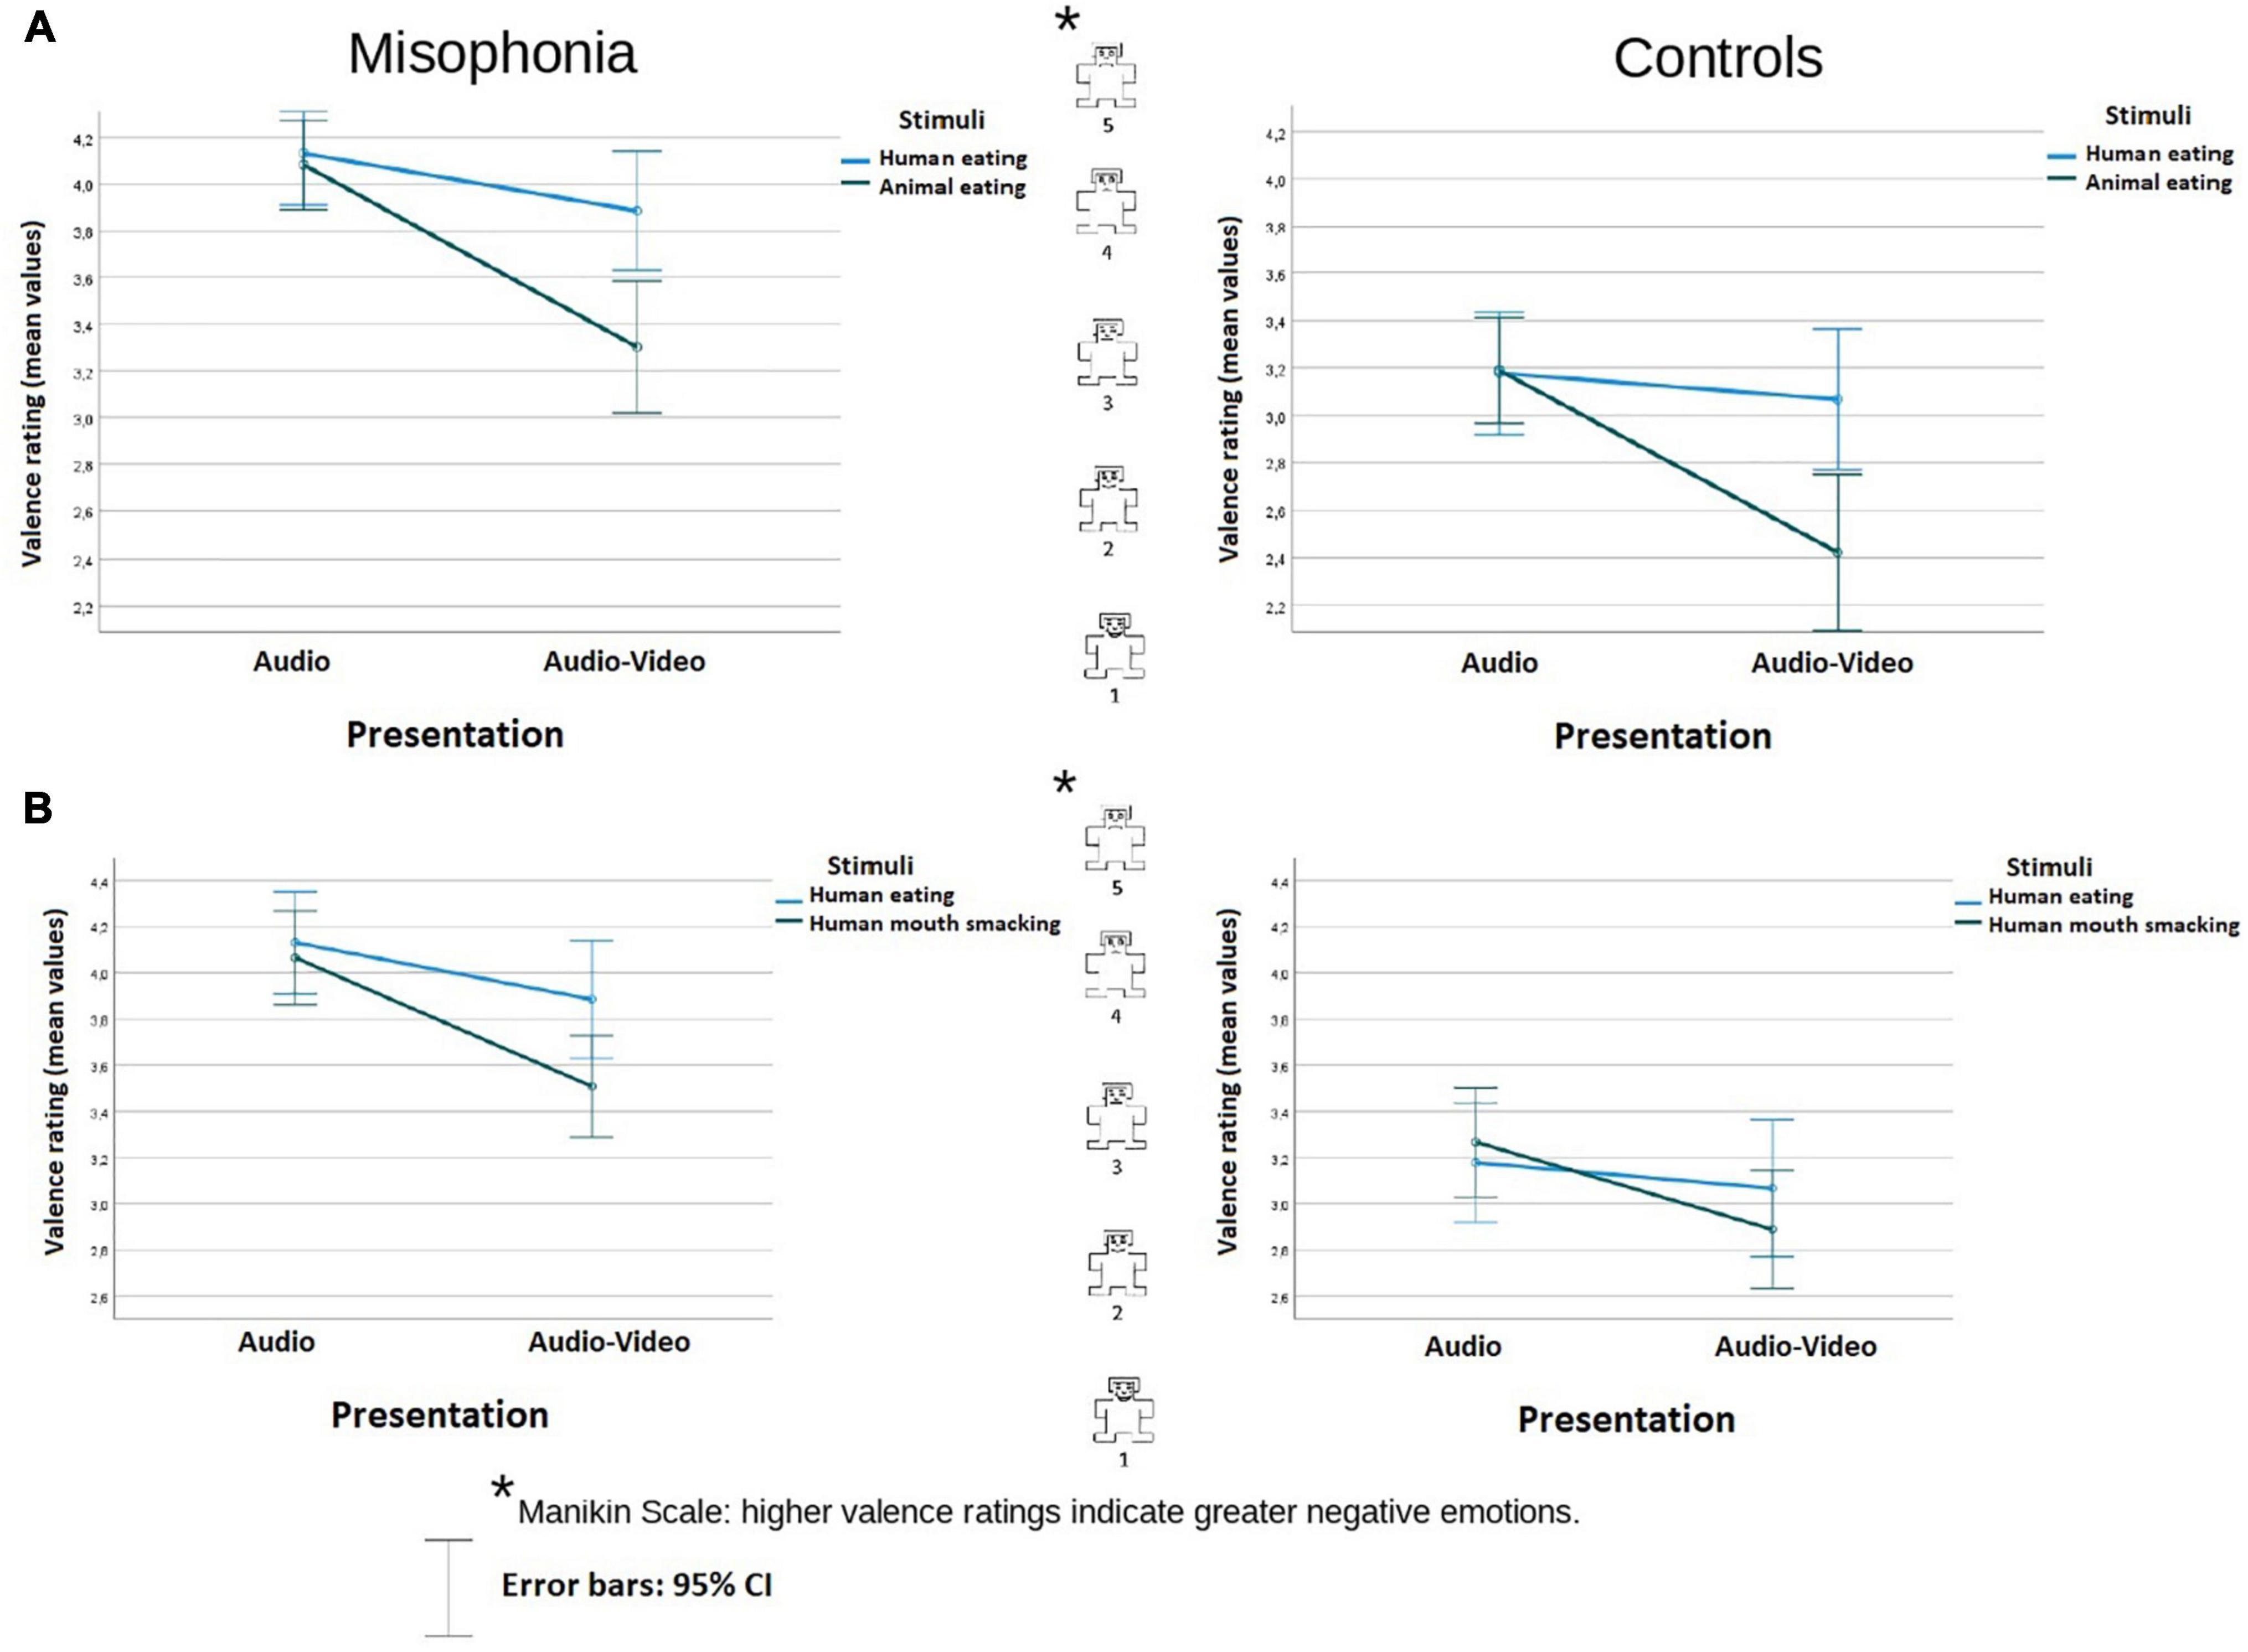 Does context matter in misophonia? A multi-method experimental investigation